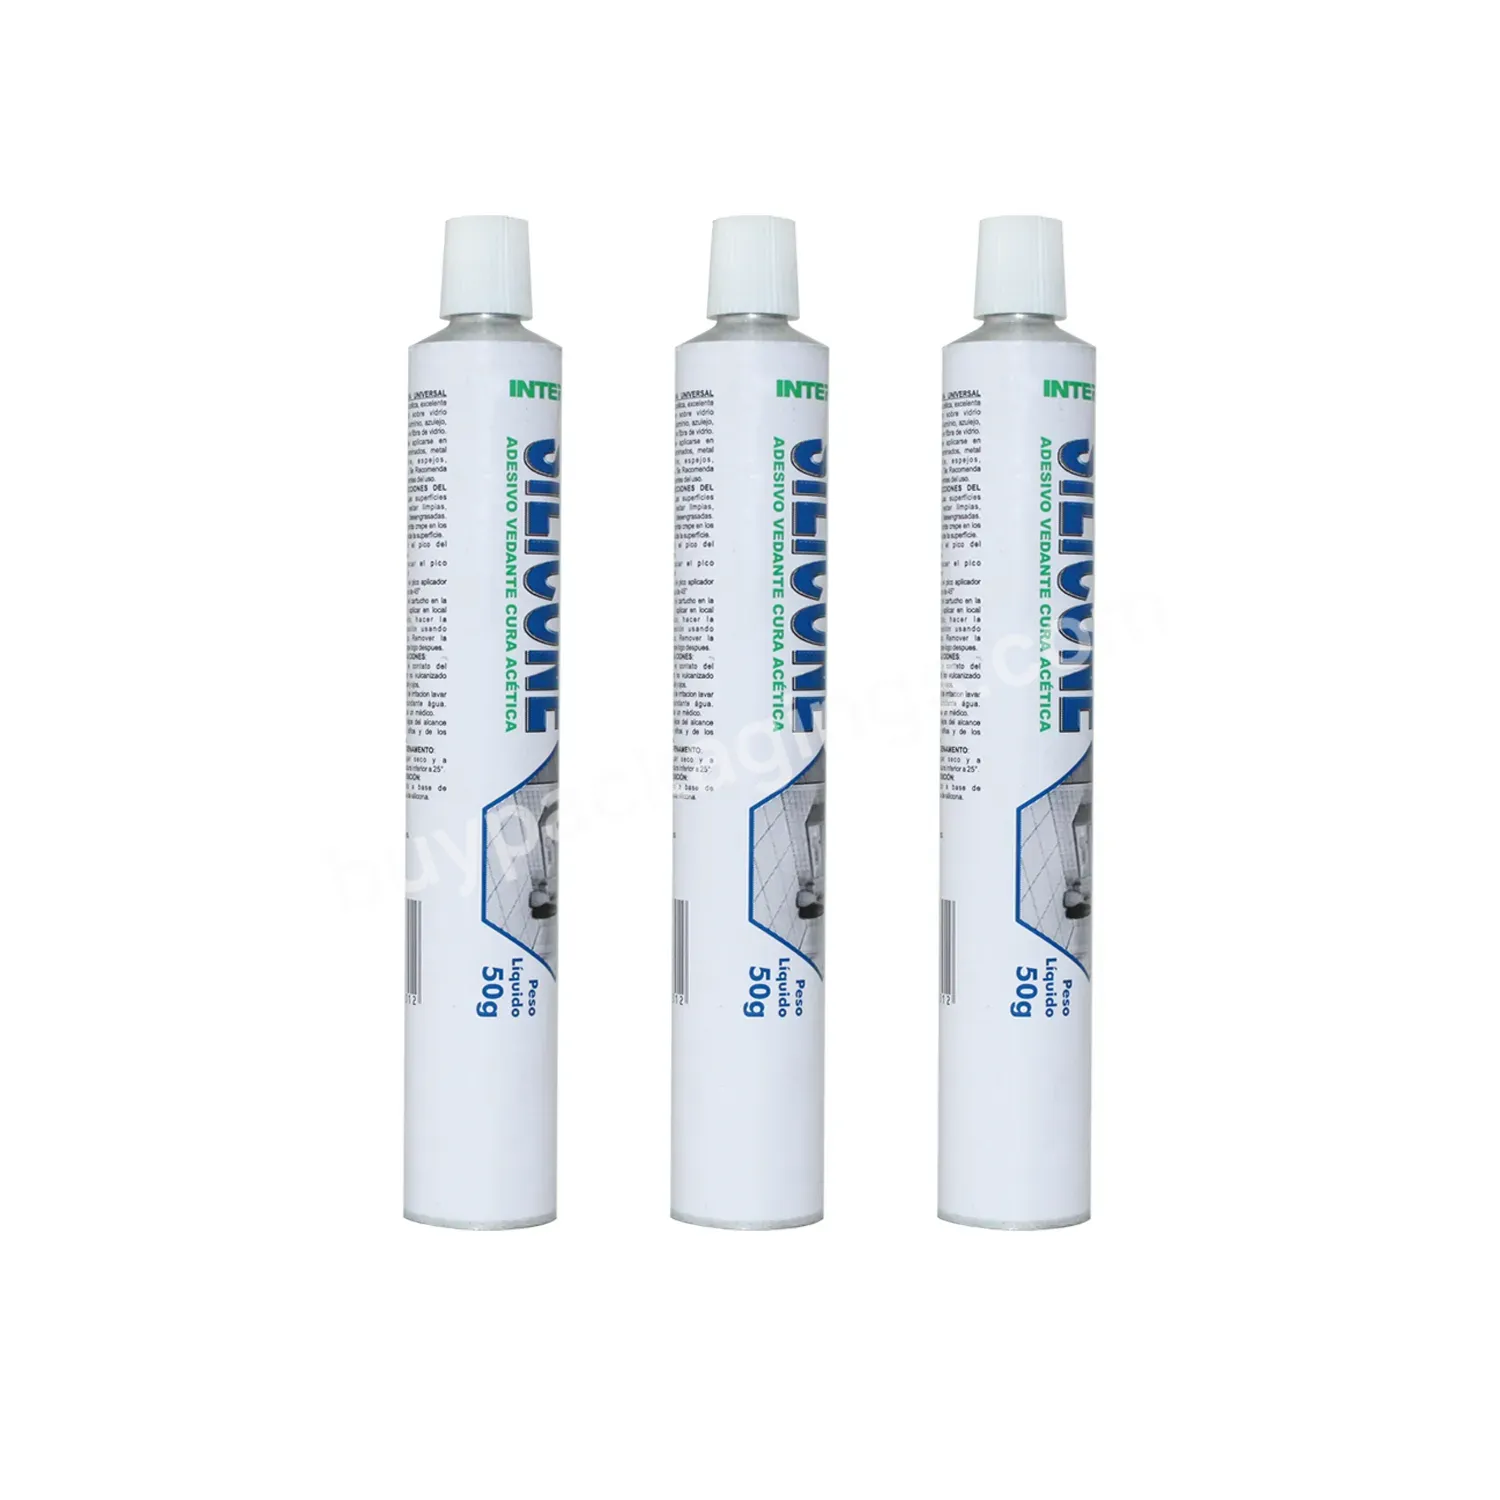 Factory Super Quality Small Size Aluminum Packaging Tube Glue Sealant Adhesive Chemical Additives Squeeze Tube - Buy Adhesive Tube,Sealant Tube Packaging,Aluminum Glue Tube.